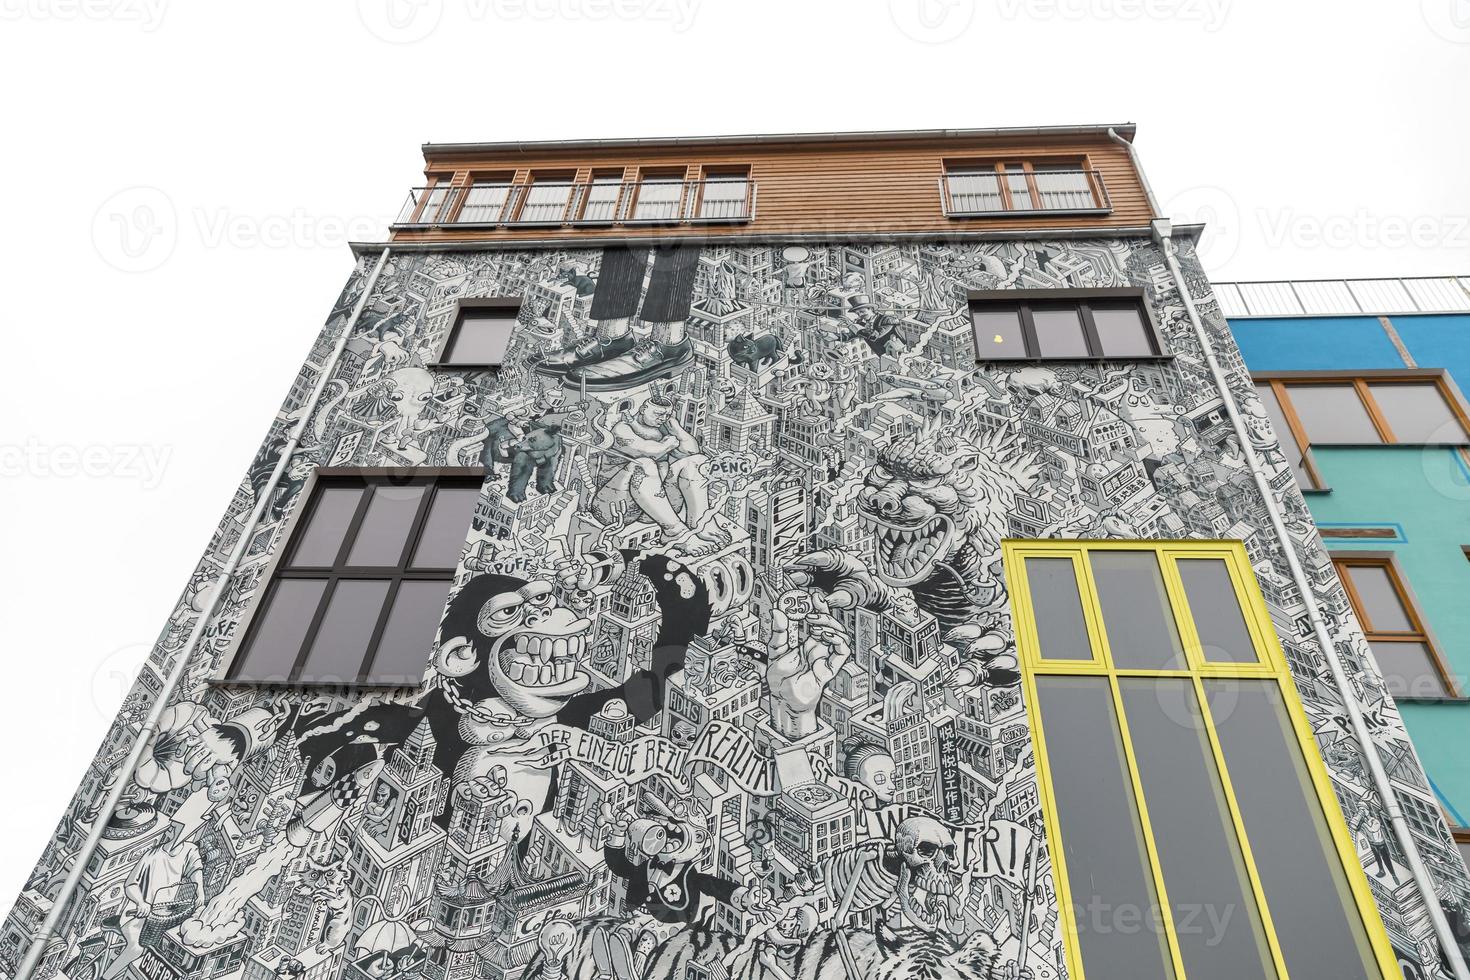 Building Covered with Cartoon in Berlin, Germany photo